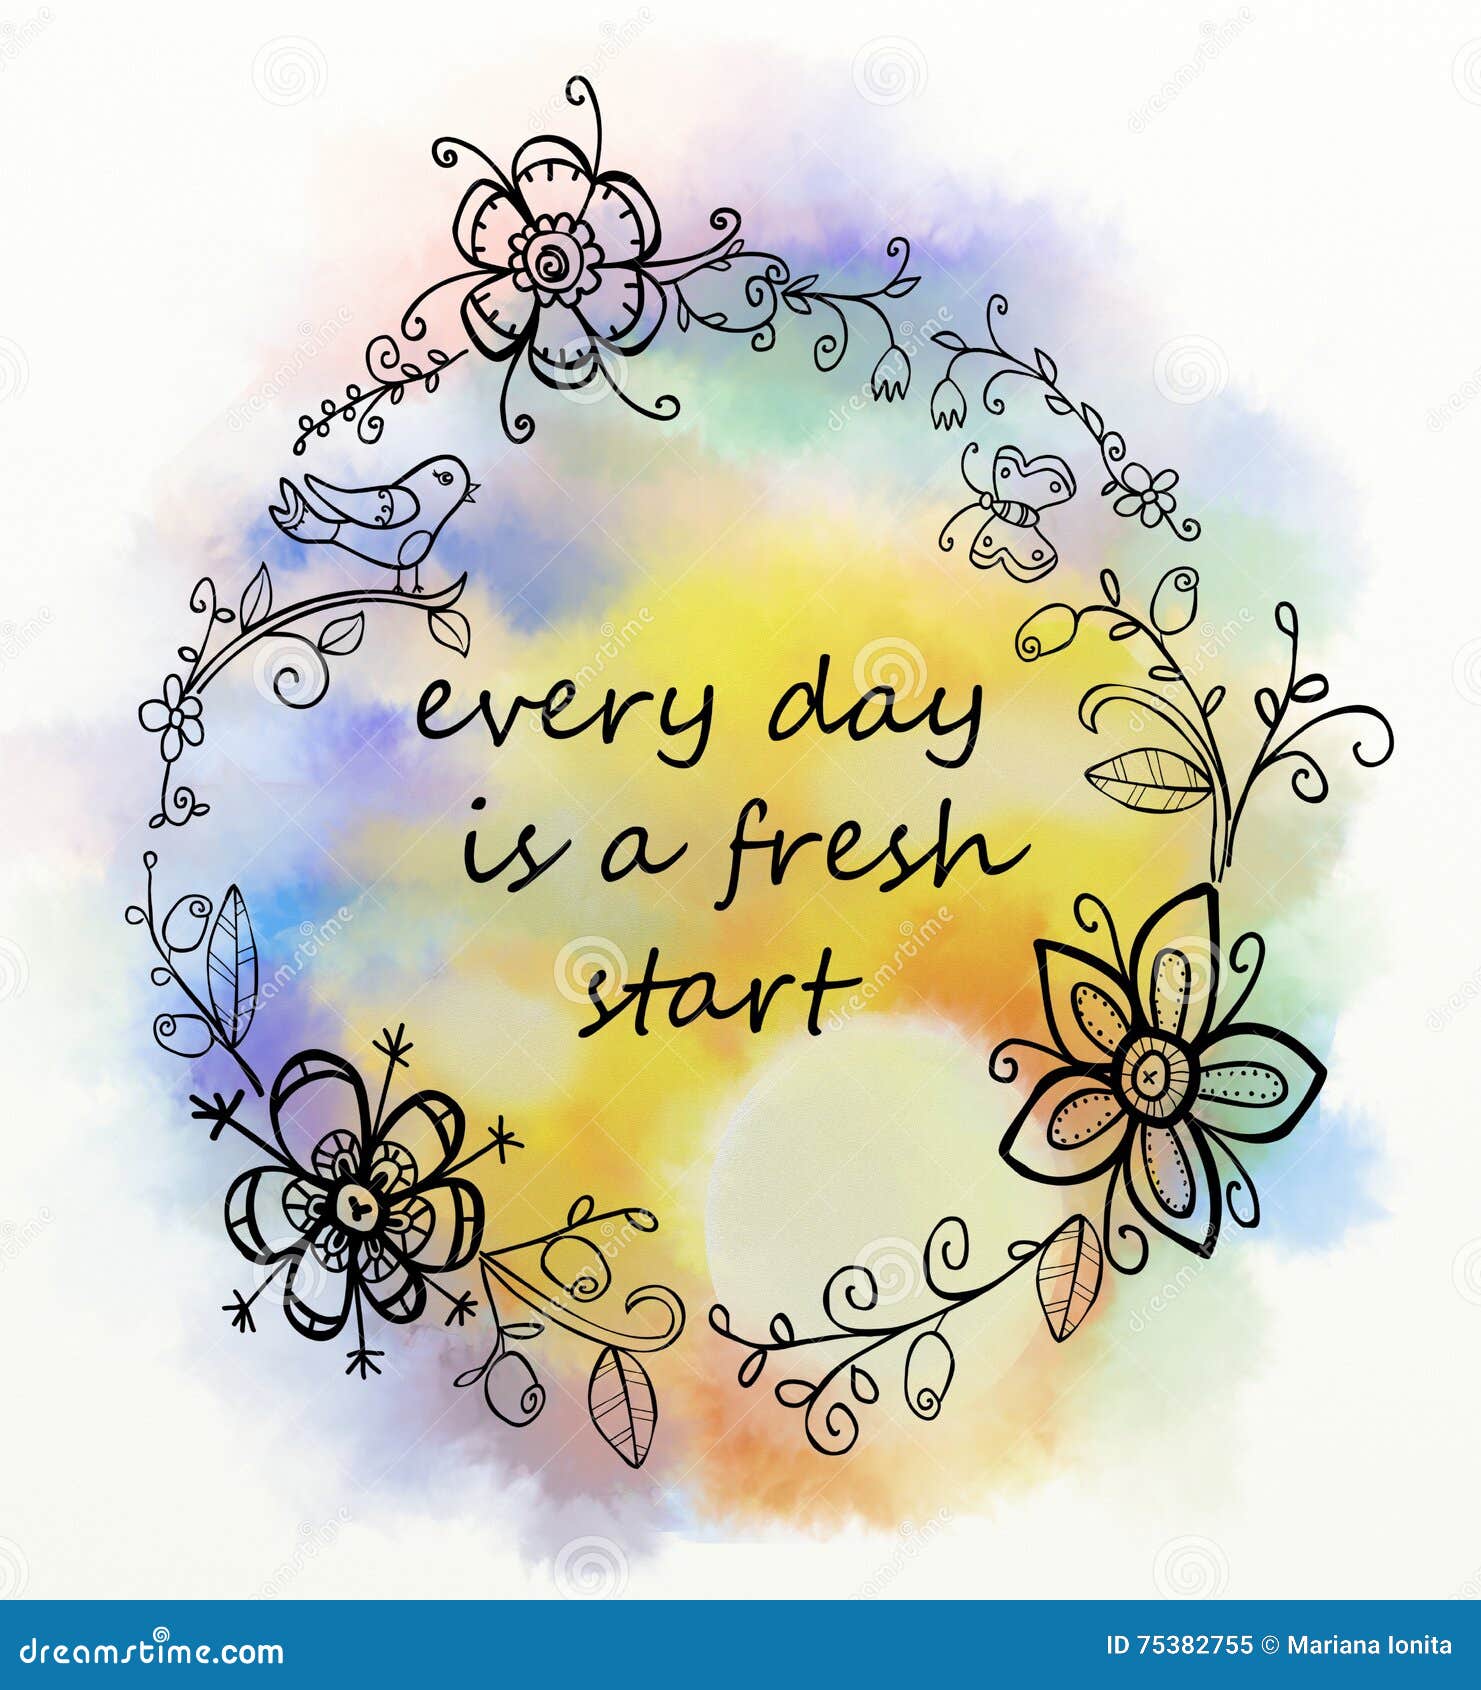 every day is a fresh start saying on watercolor background